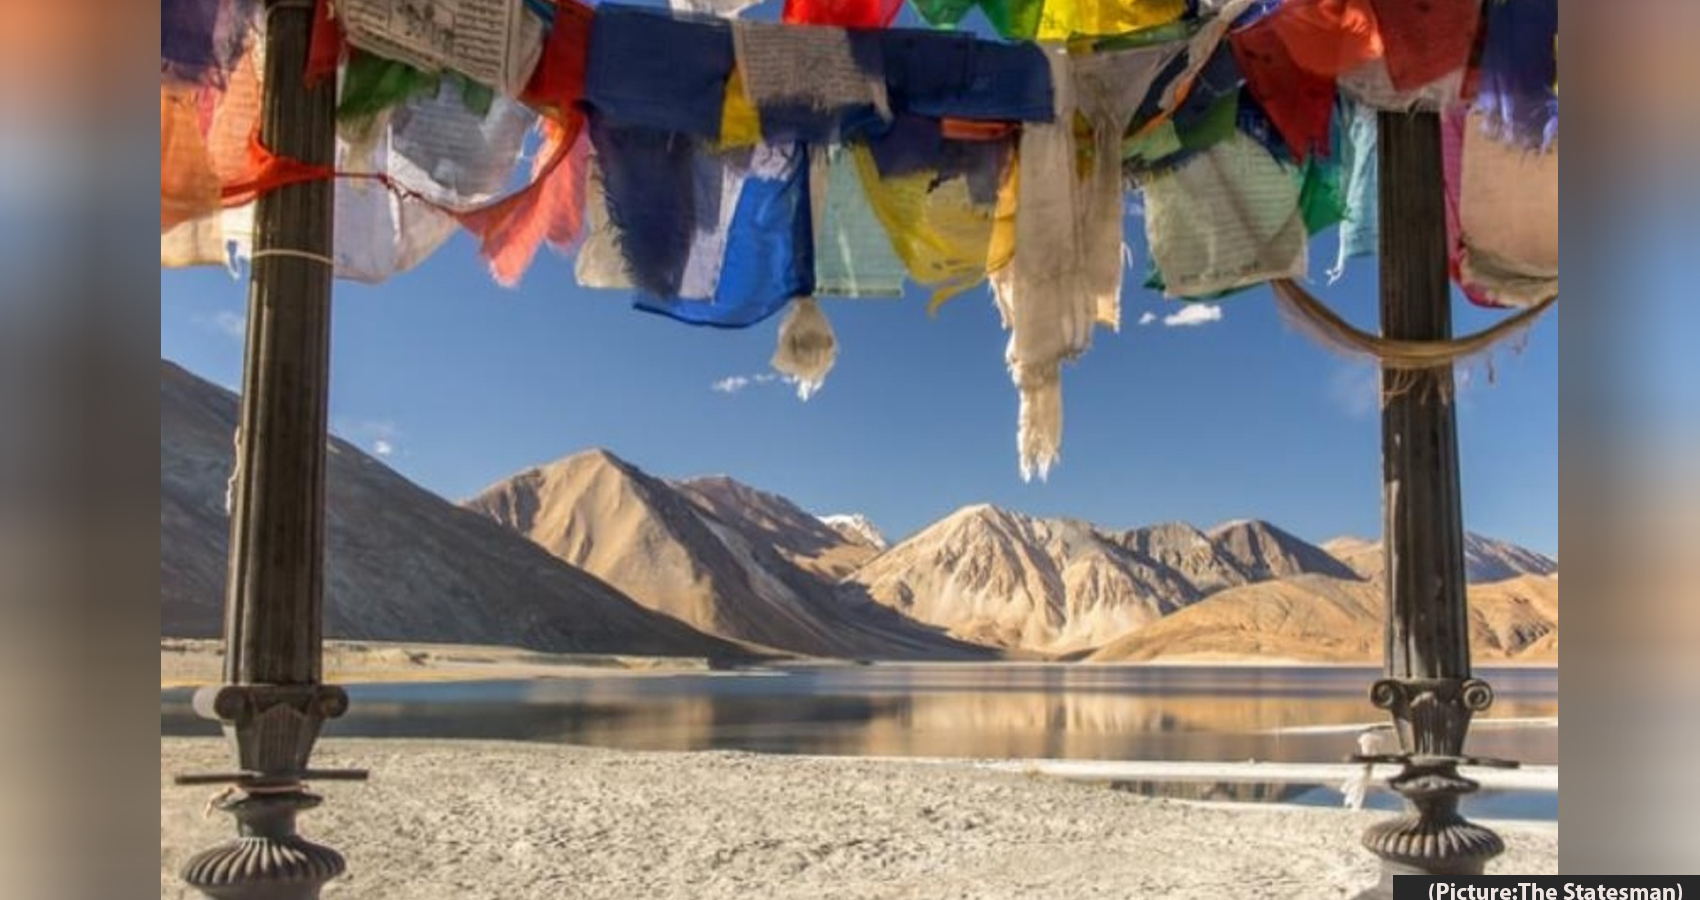 In Ladakh, Airbnb & SEWA Hosts Will Offer A Unique And Immersive Experience